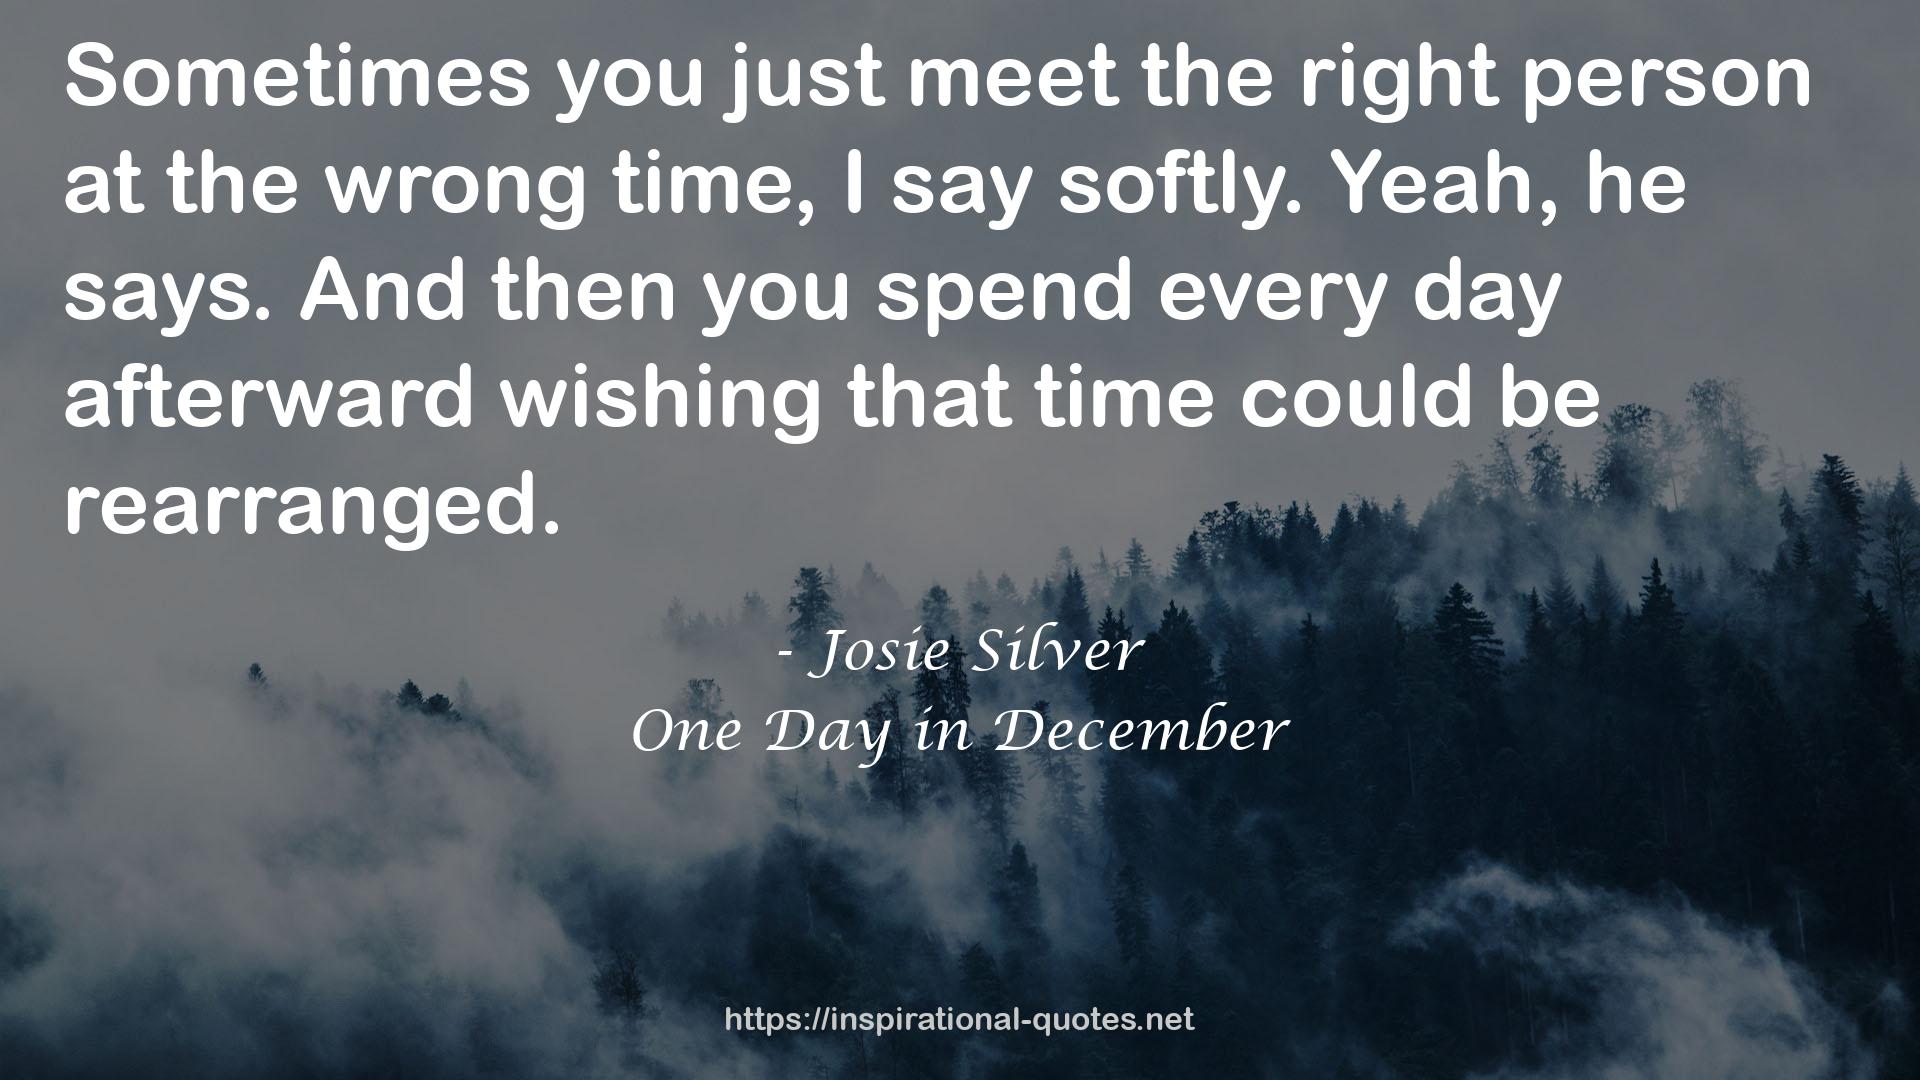 One Day in December QUOTES